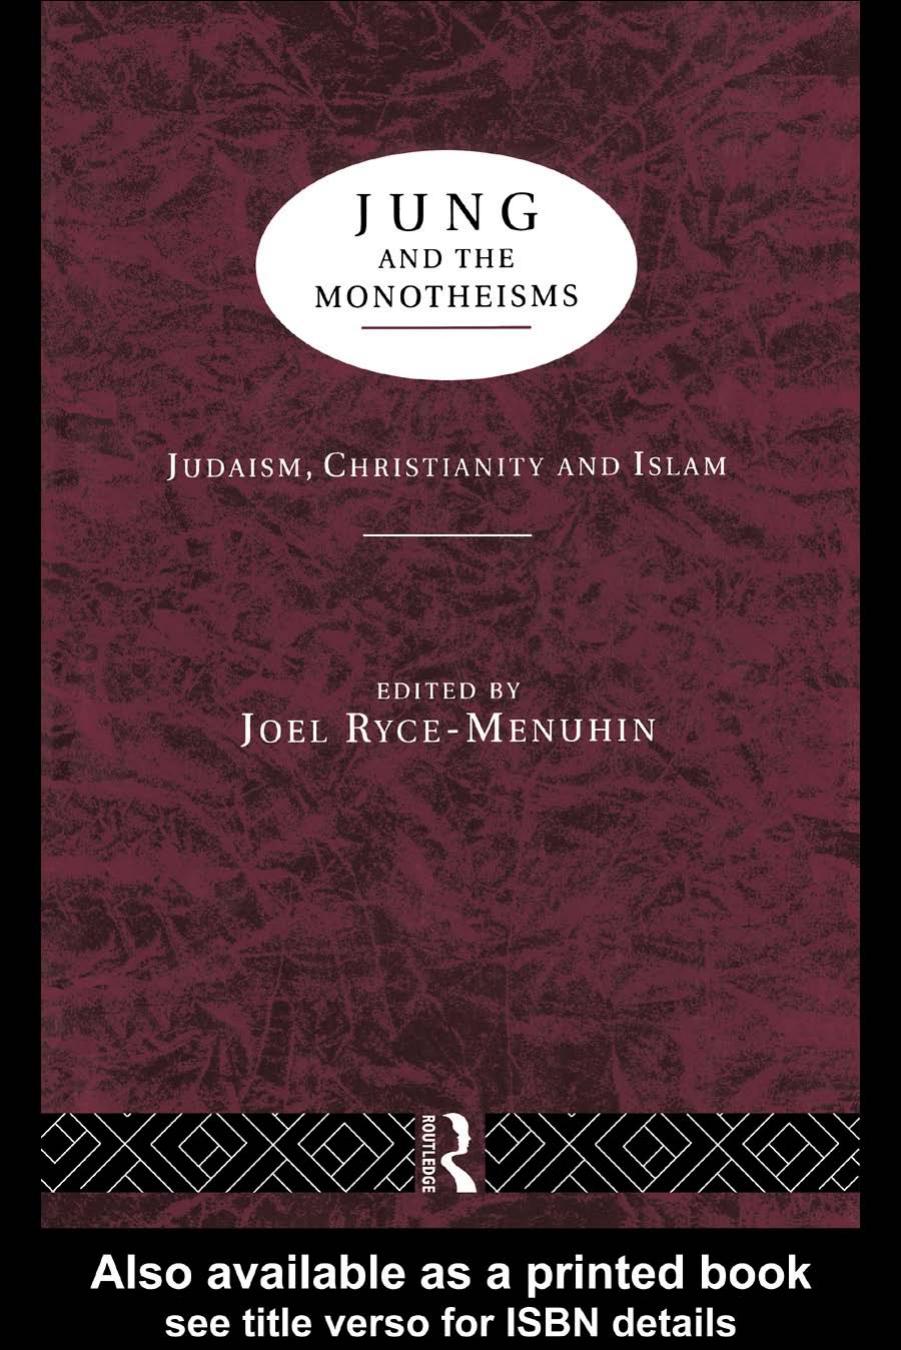 Jung and the Monotheisms: Judaism, Christianity, and Islam